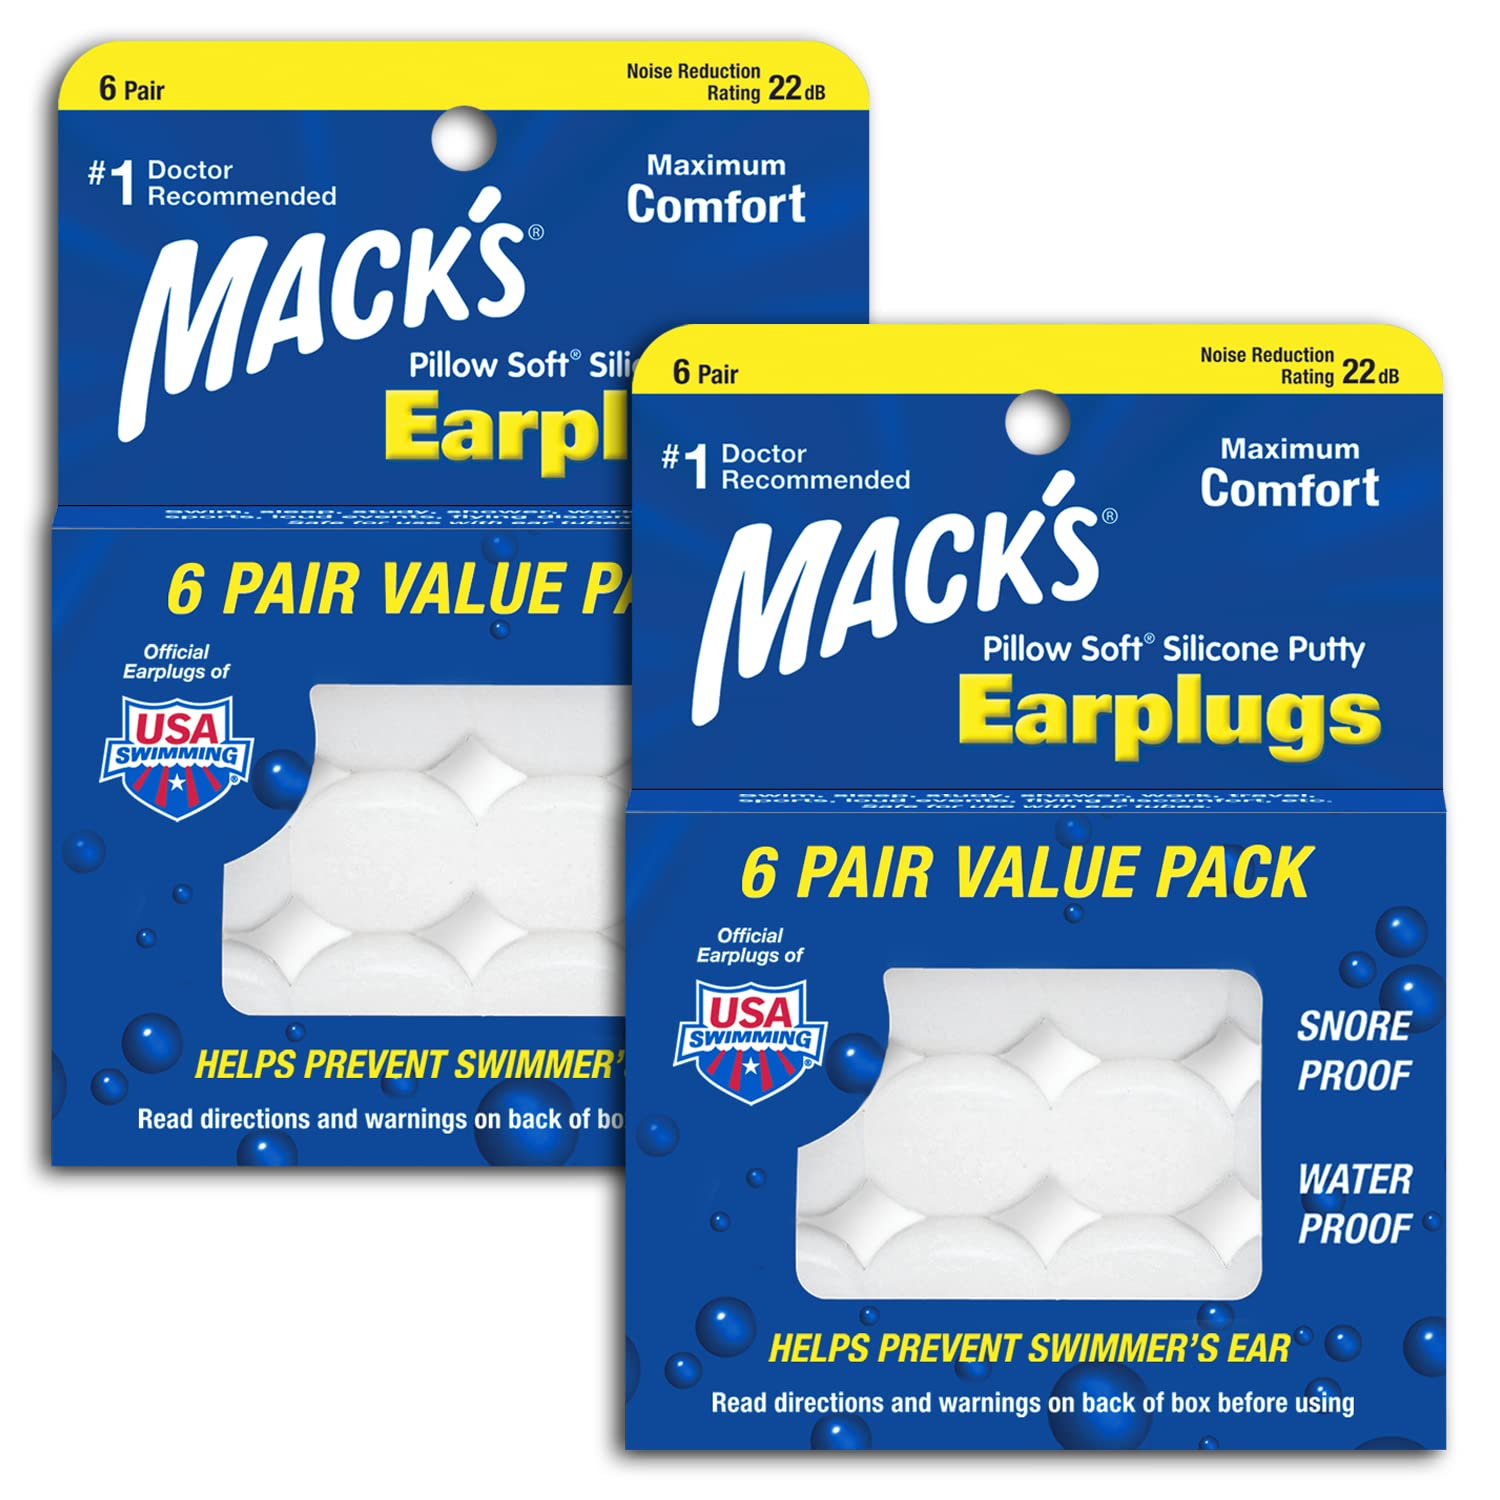 Mack's Pillow Soft Silicone Earplugs - 6 Pair (Pack of 2), Value Pack – The Original Moldable Silicone Putty Ear Plugs for Sleeping, Snoring, Swimming, Travel, Concerts and Studying